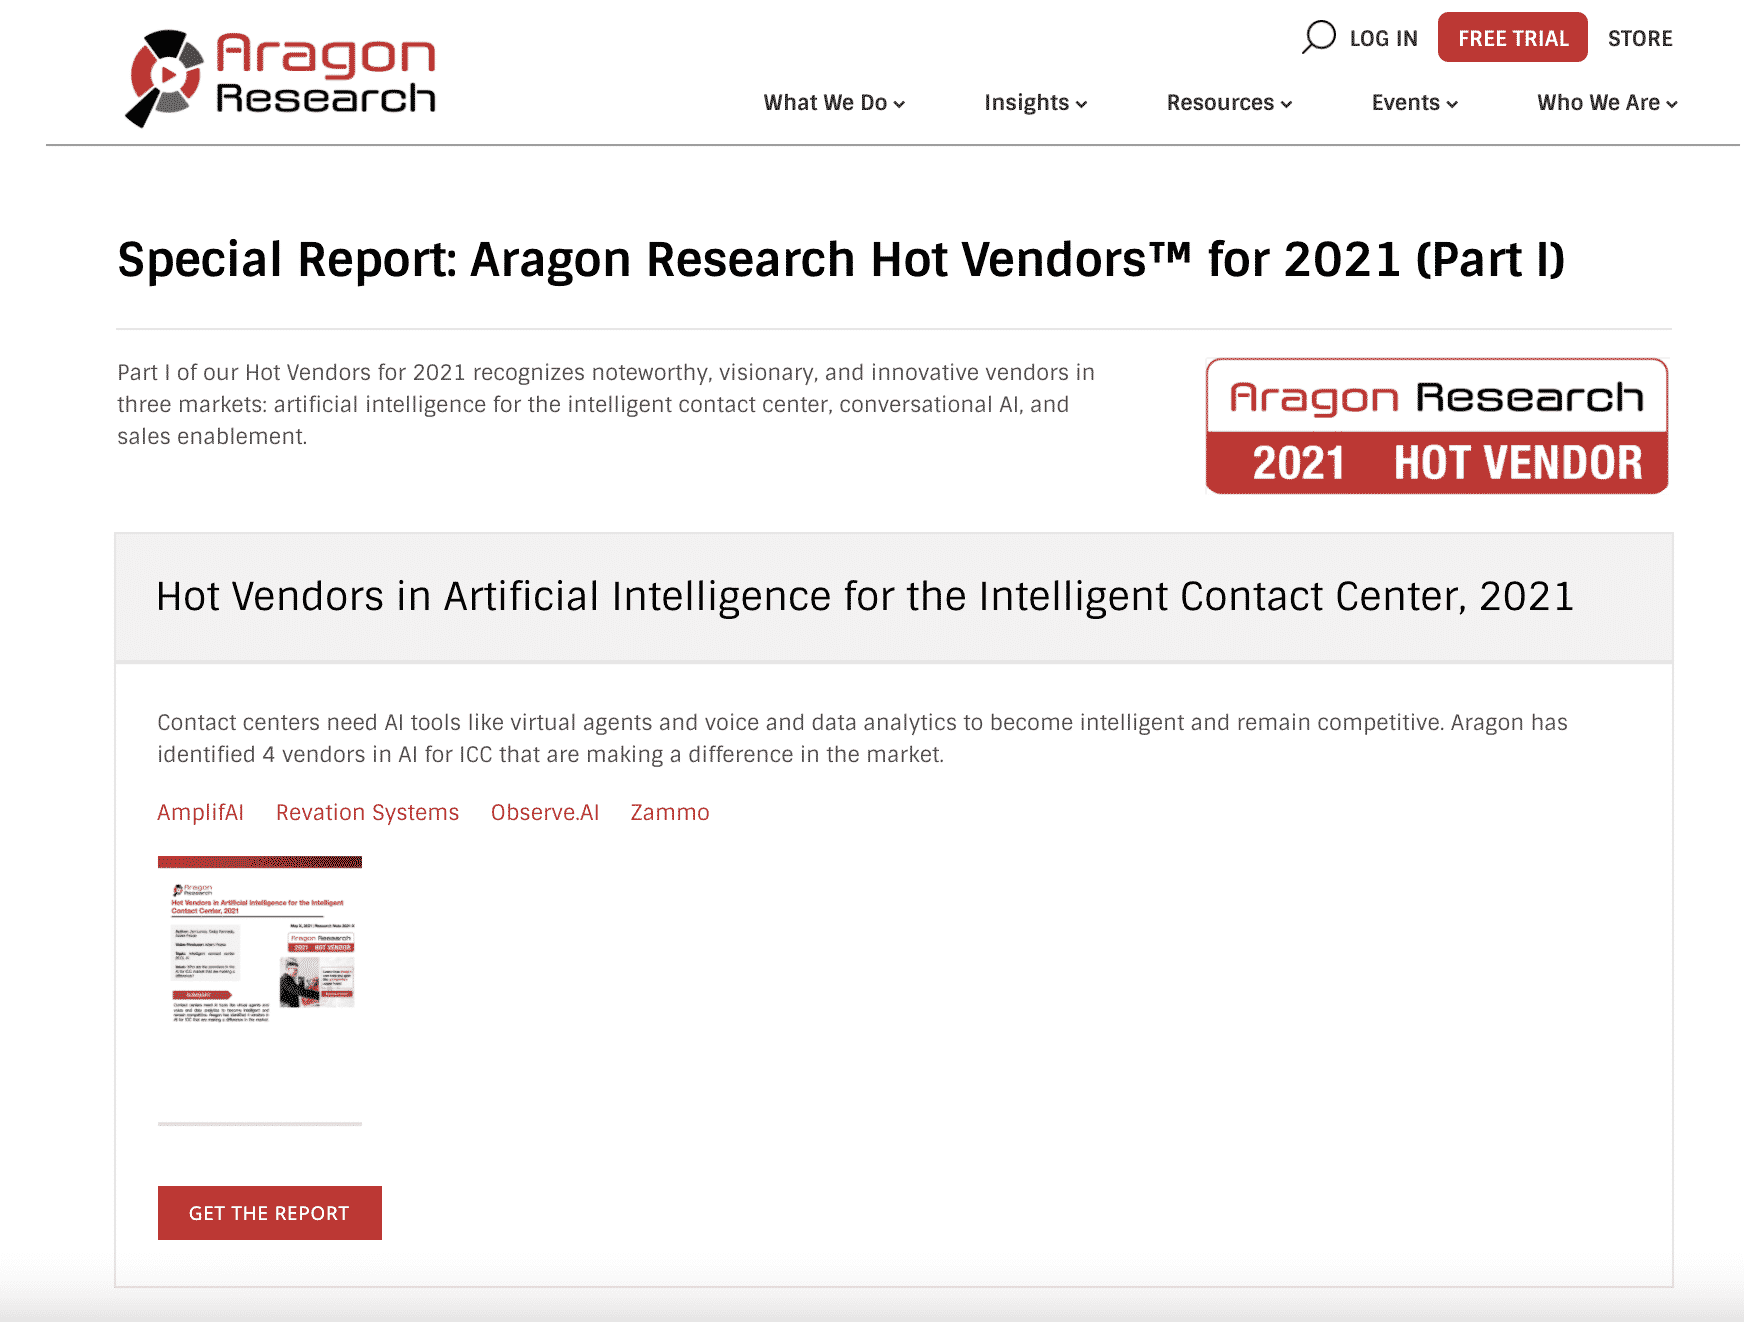 Hot Vendors 2021 Heres What You Need to Know 1 - Hot Vendors 2021: Here’s What You Need to Know